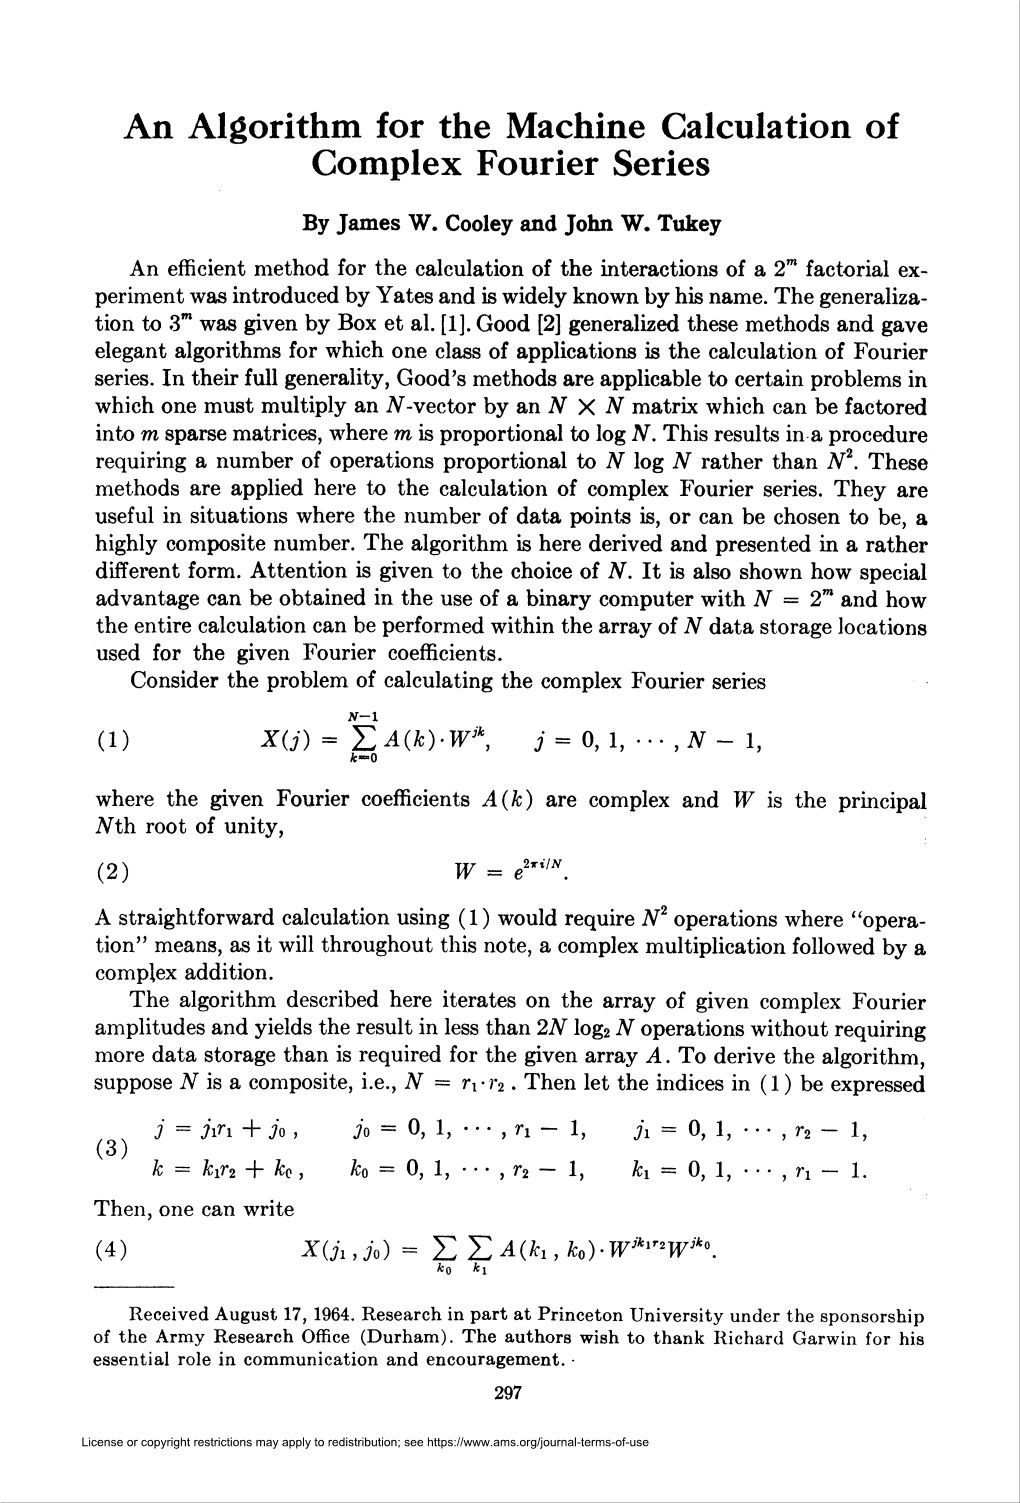 An Algorithm for the Machine Calculation of Complex Fourier Series